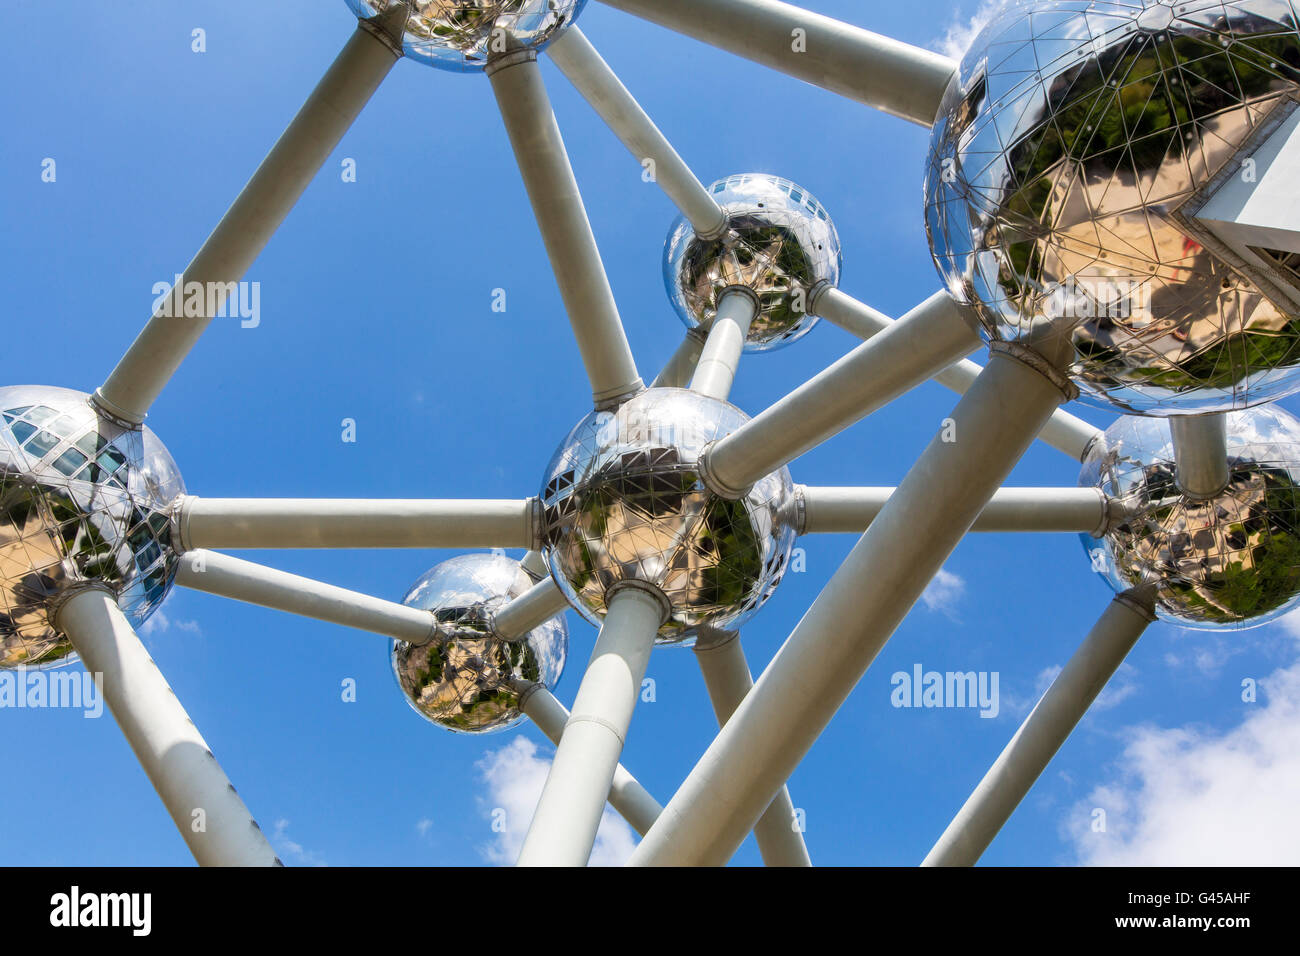 The Atomium in Brussels, Belgium, at the exhibition grounds, Stock Photo